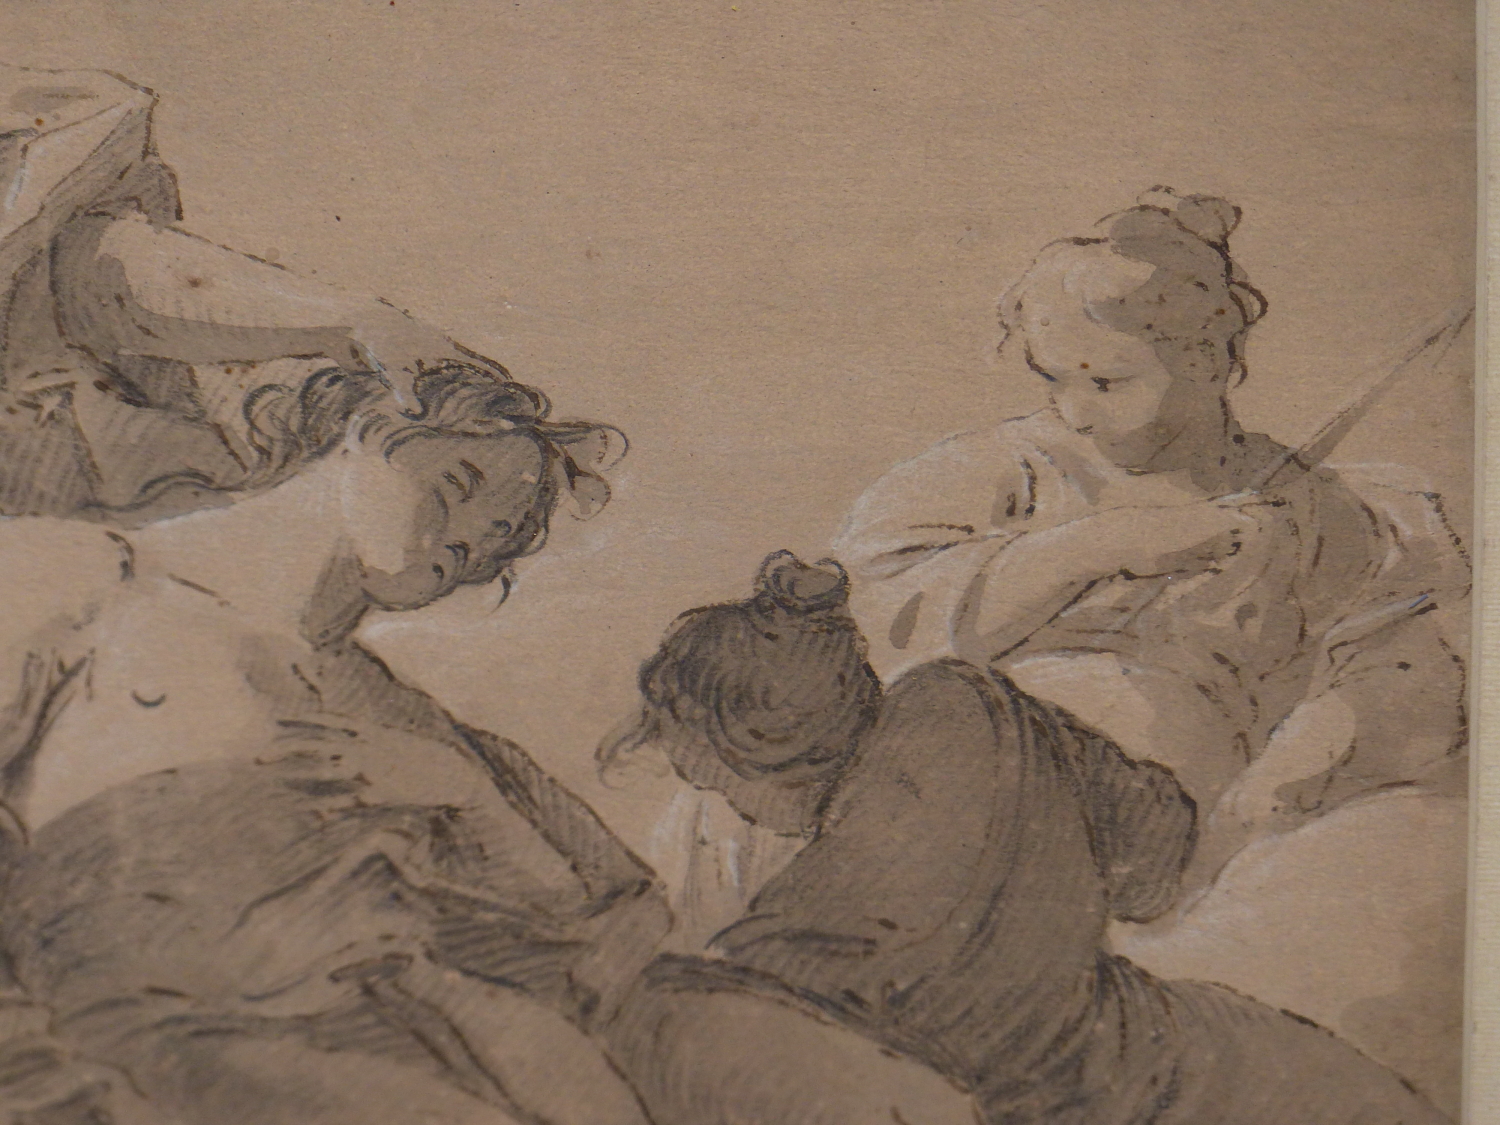 AFTER GIOVANNI TIEPOLO, AN 18TH/ 19TH FIGURE STUDY, GREY WASH, PENCIL AND CHALK ON PAPER, BEARS - Image 7 of 9